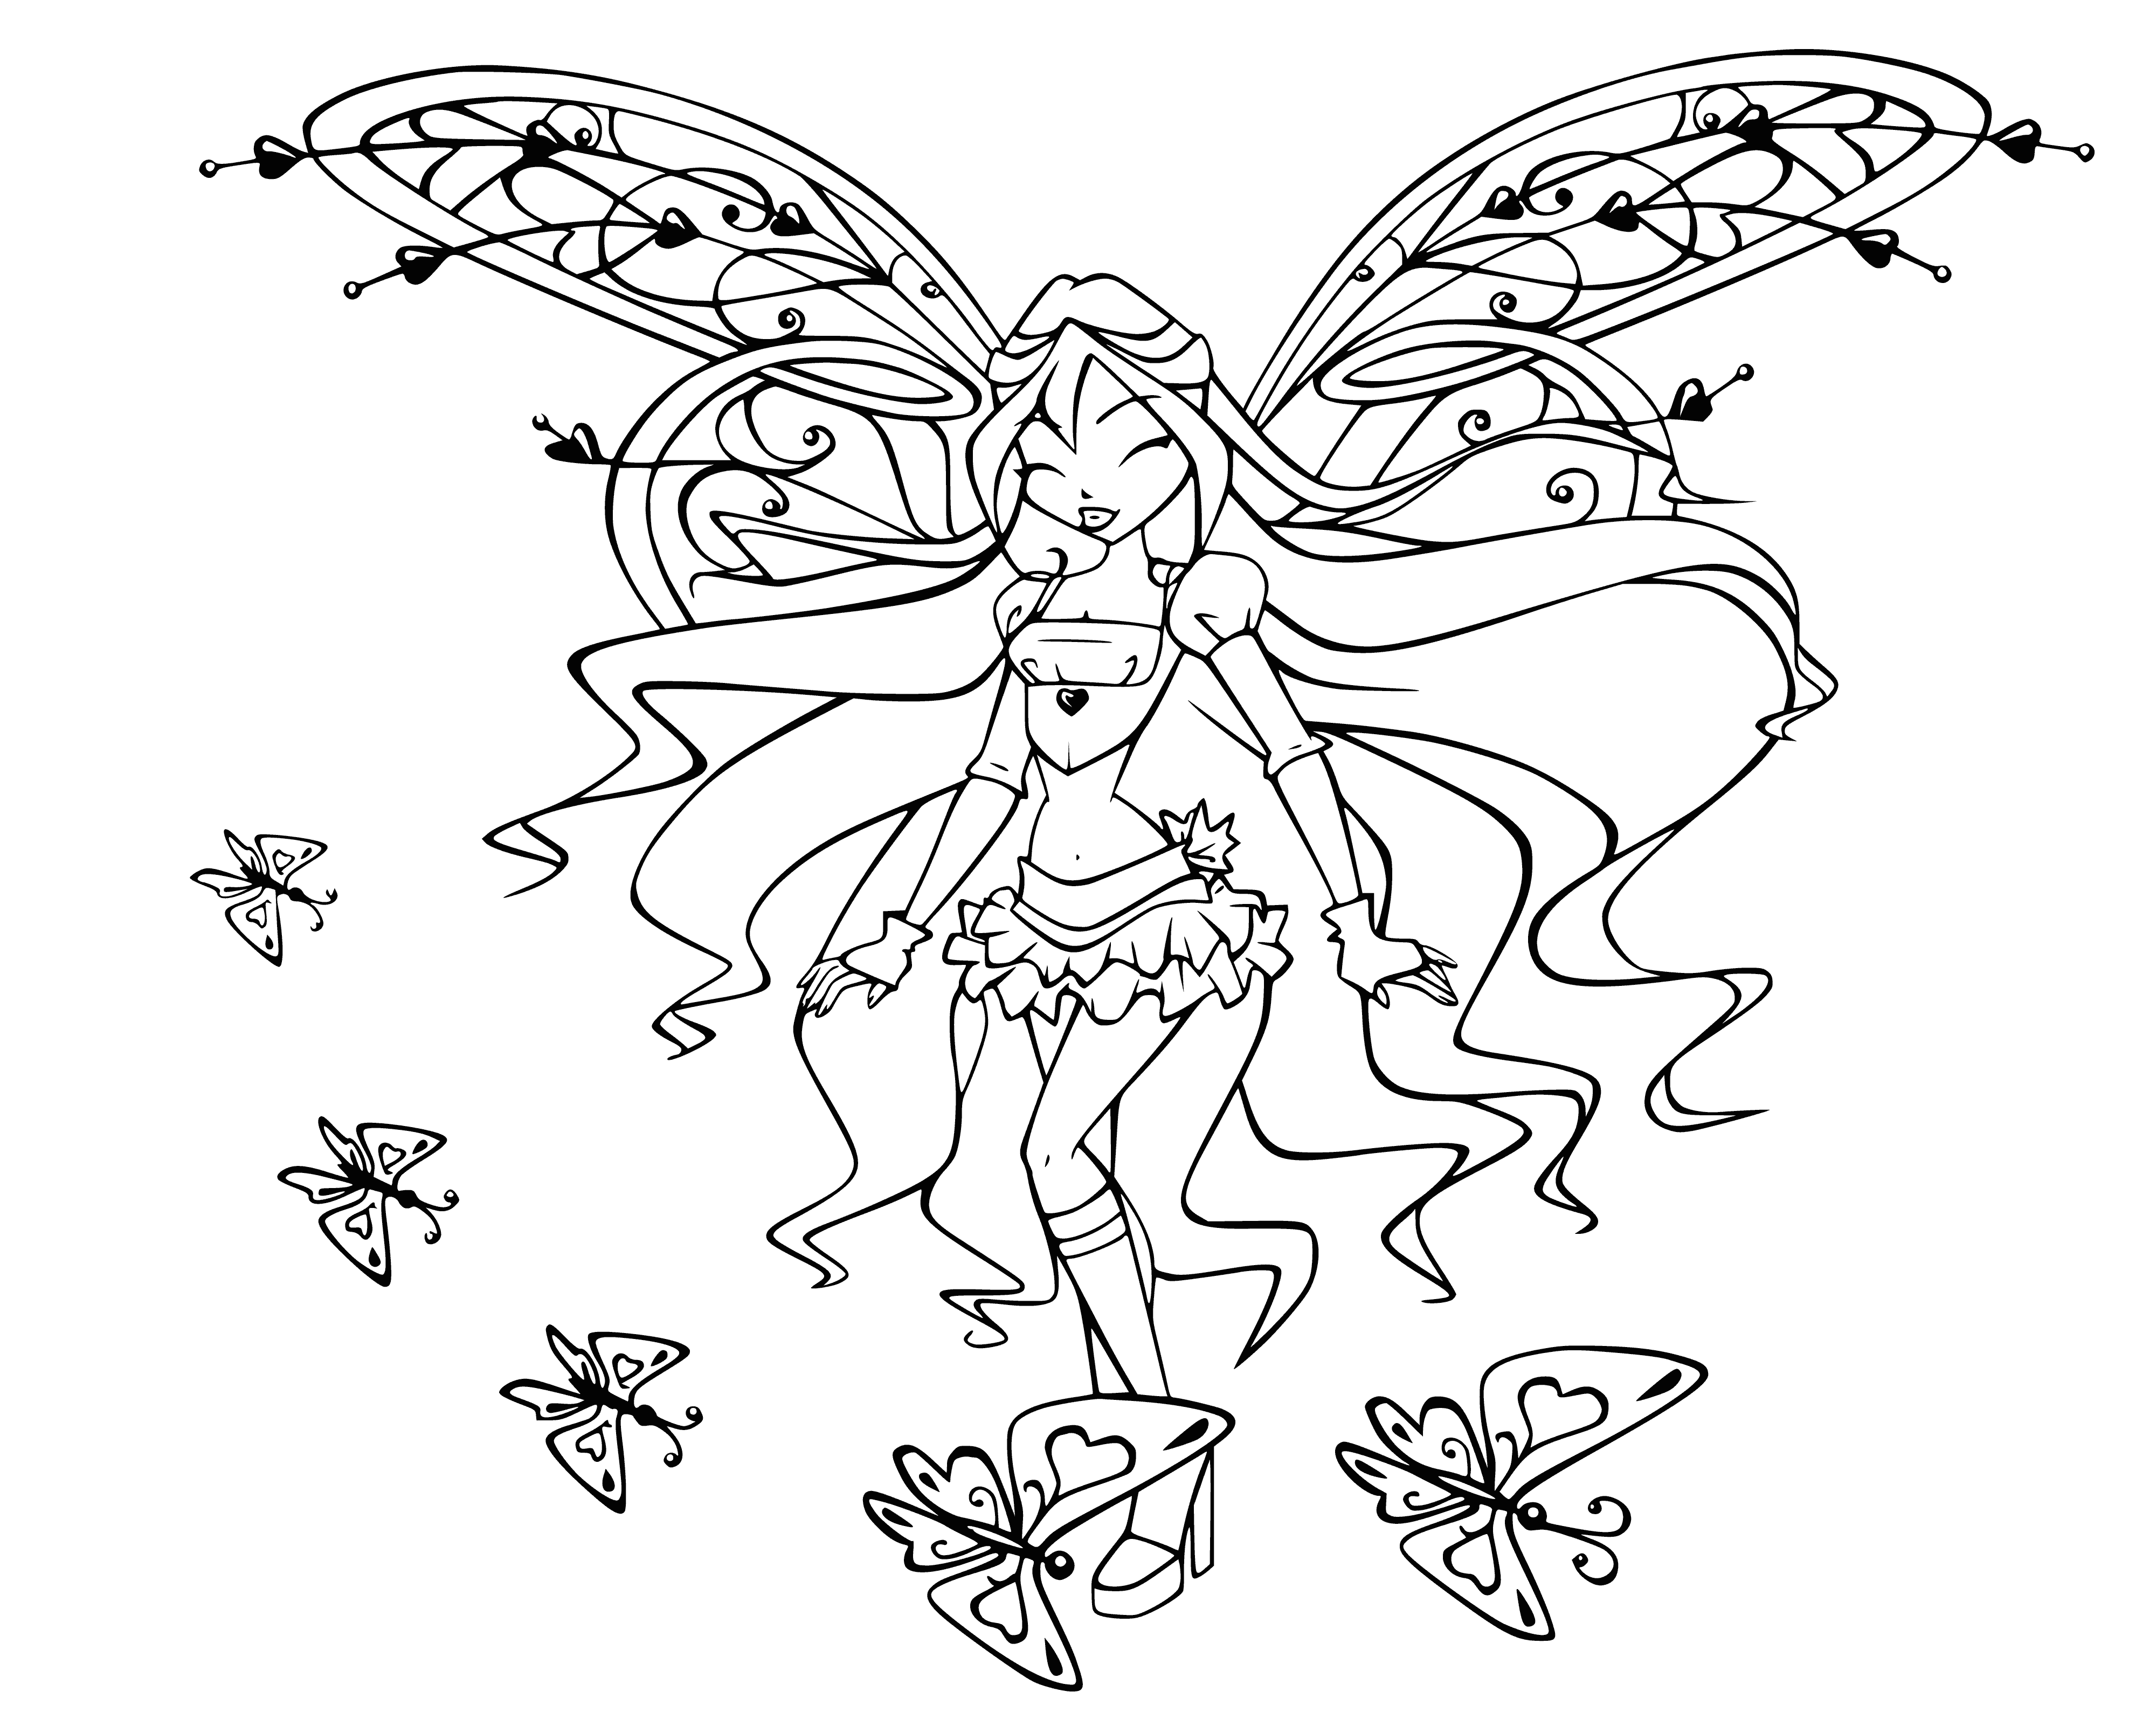 coloring page: A tall woman in a blue dress with blonde hair, blue eyes and large blue wings stands before a blue flower.